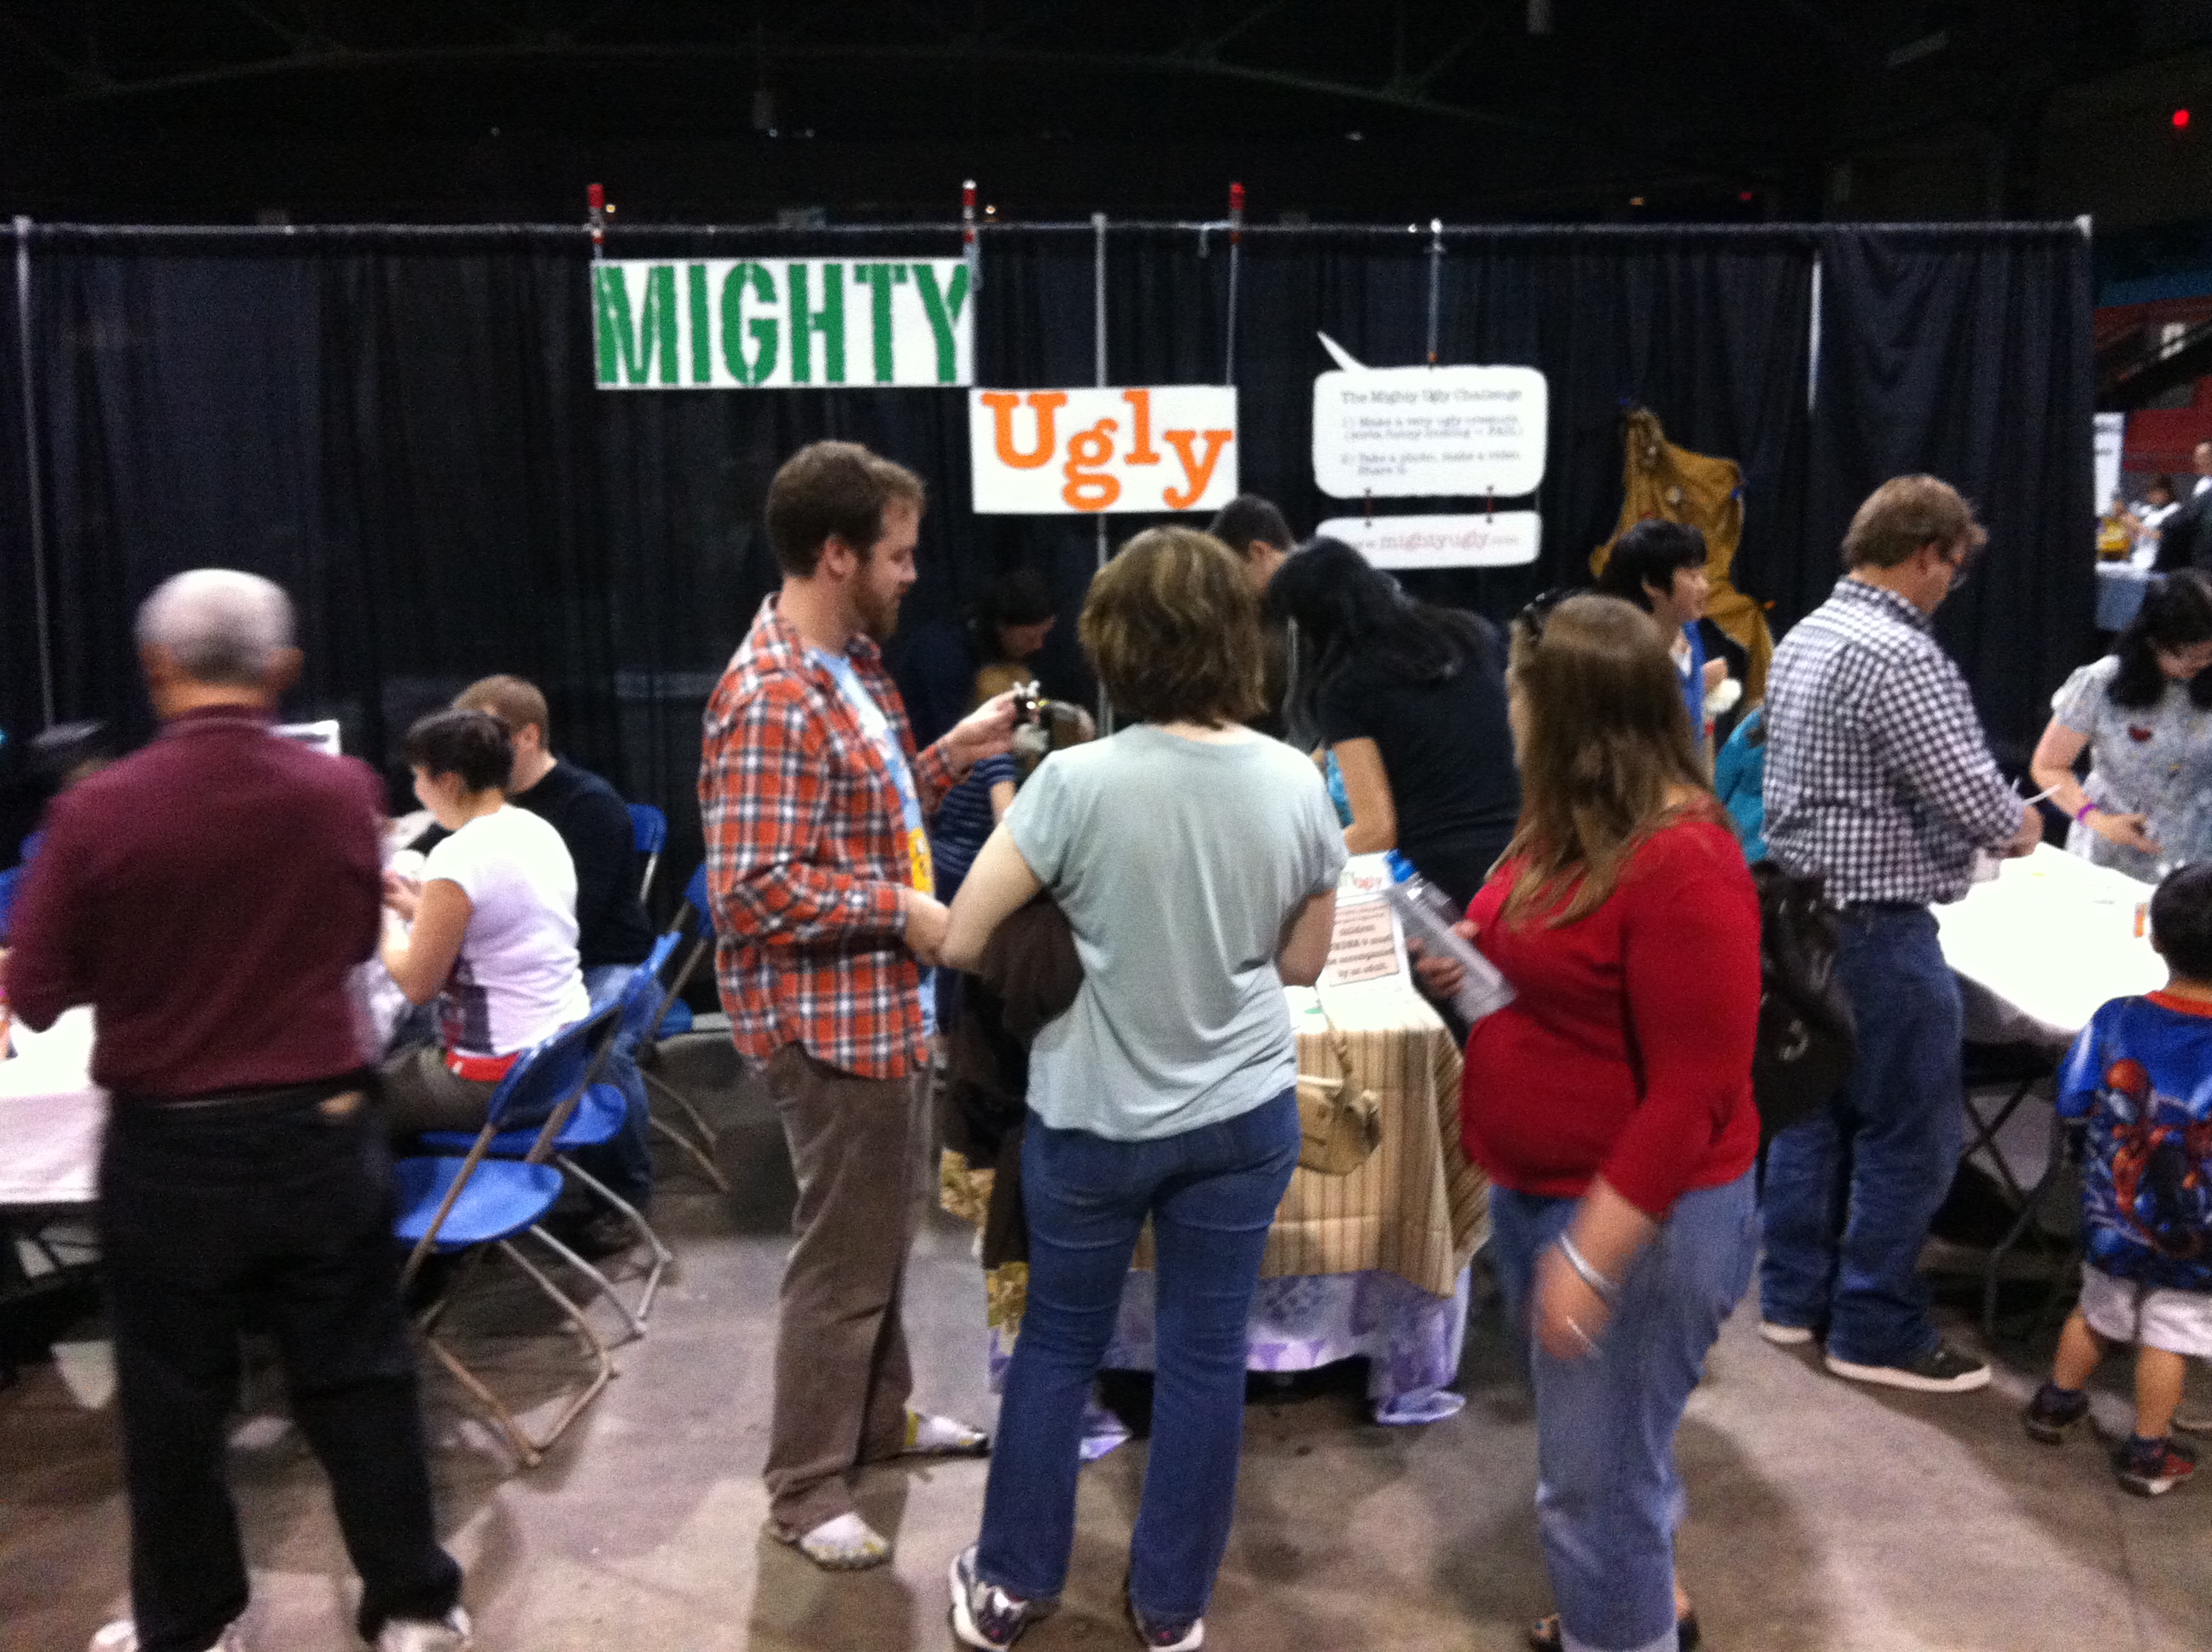 Mighty Ugly booth in action